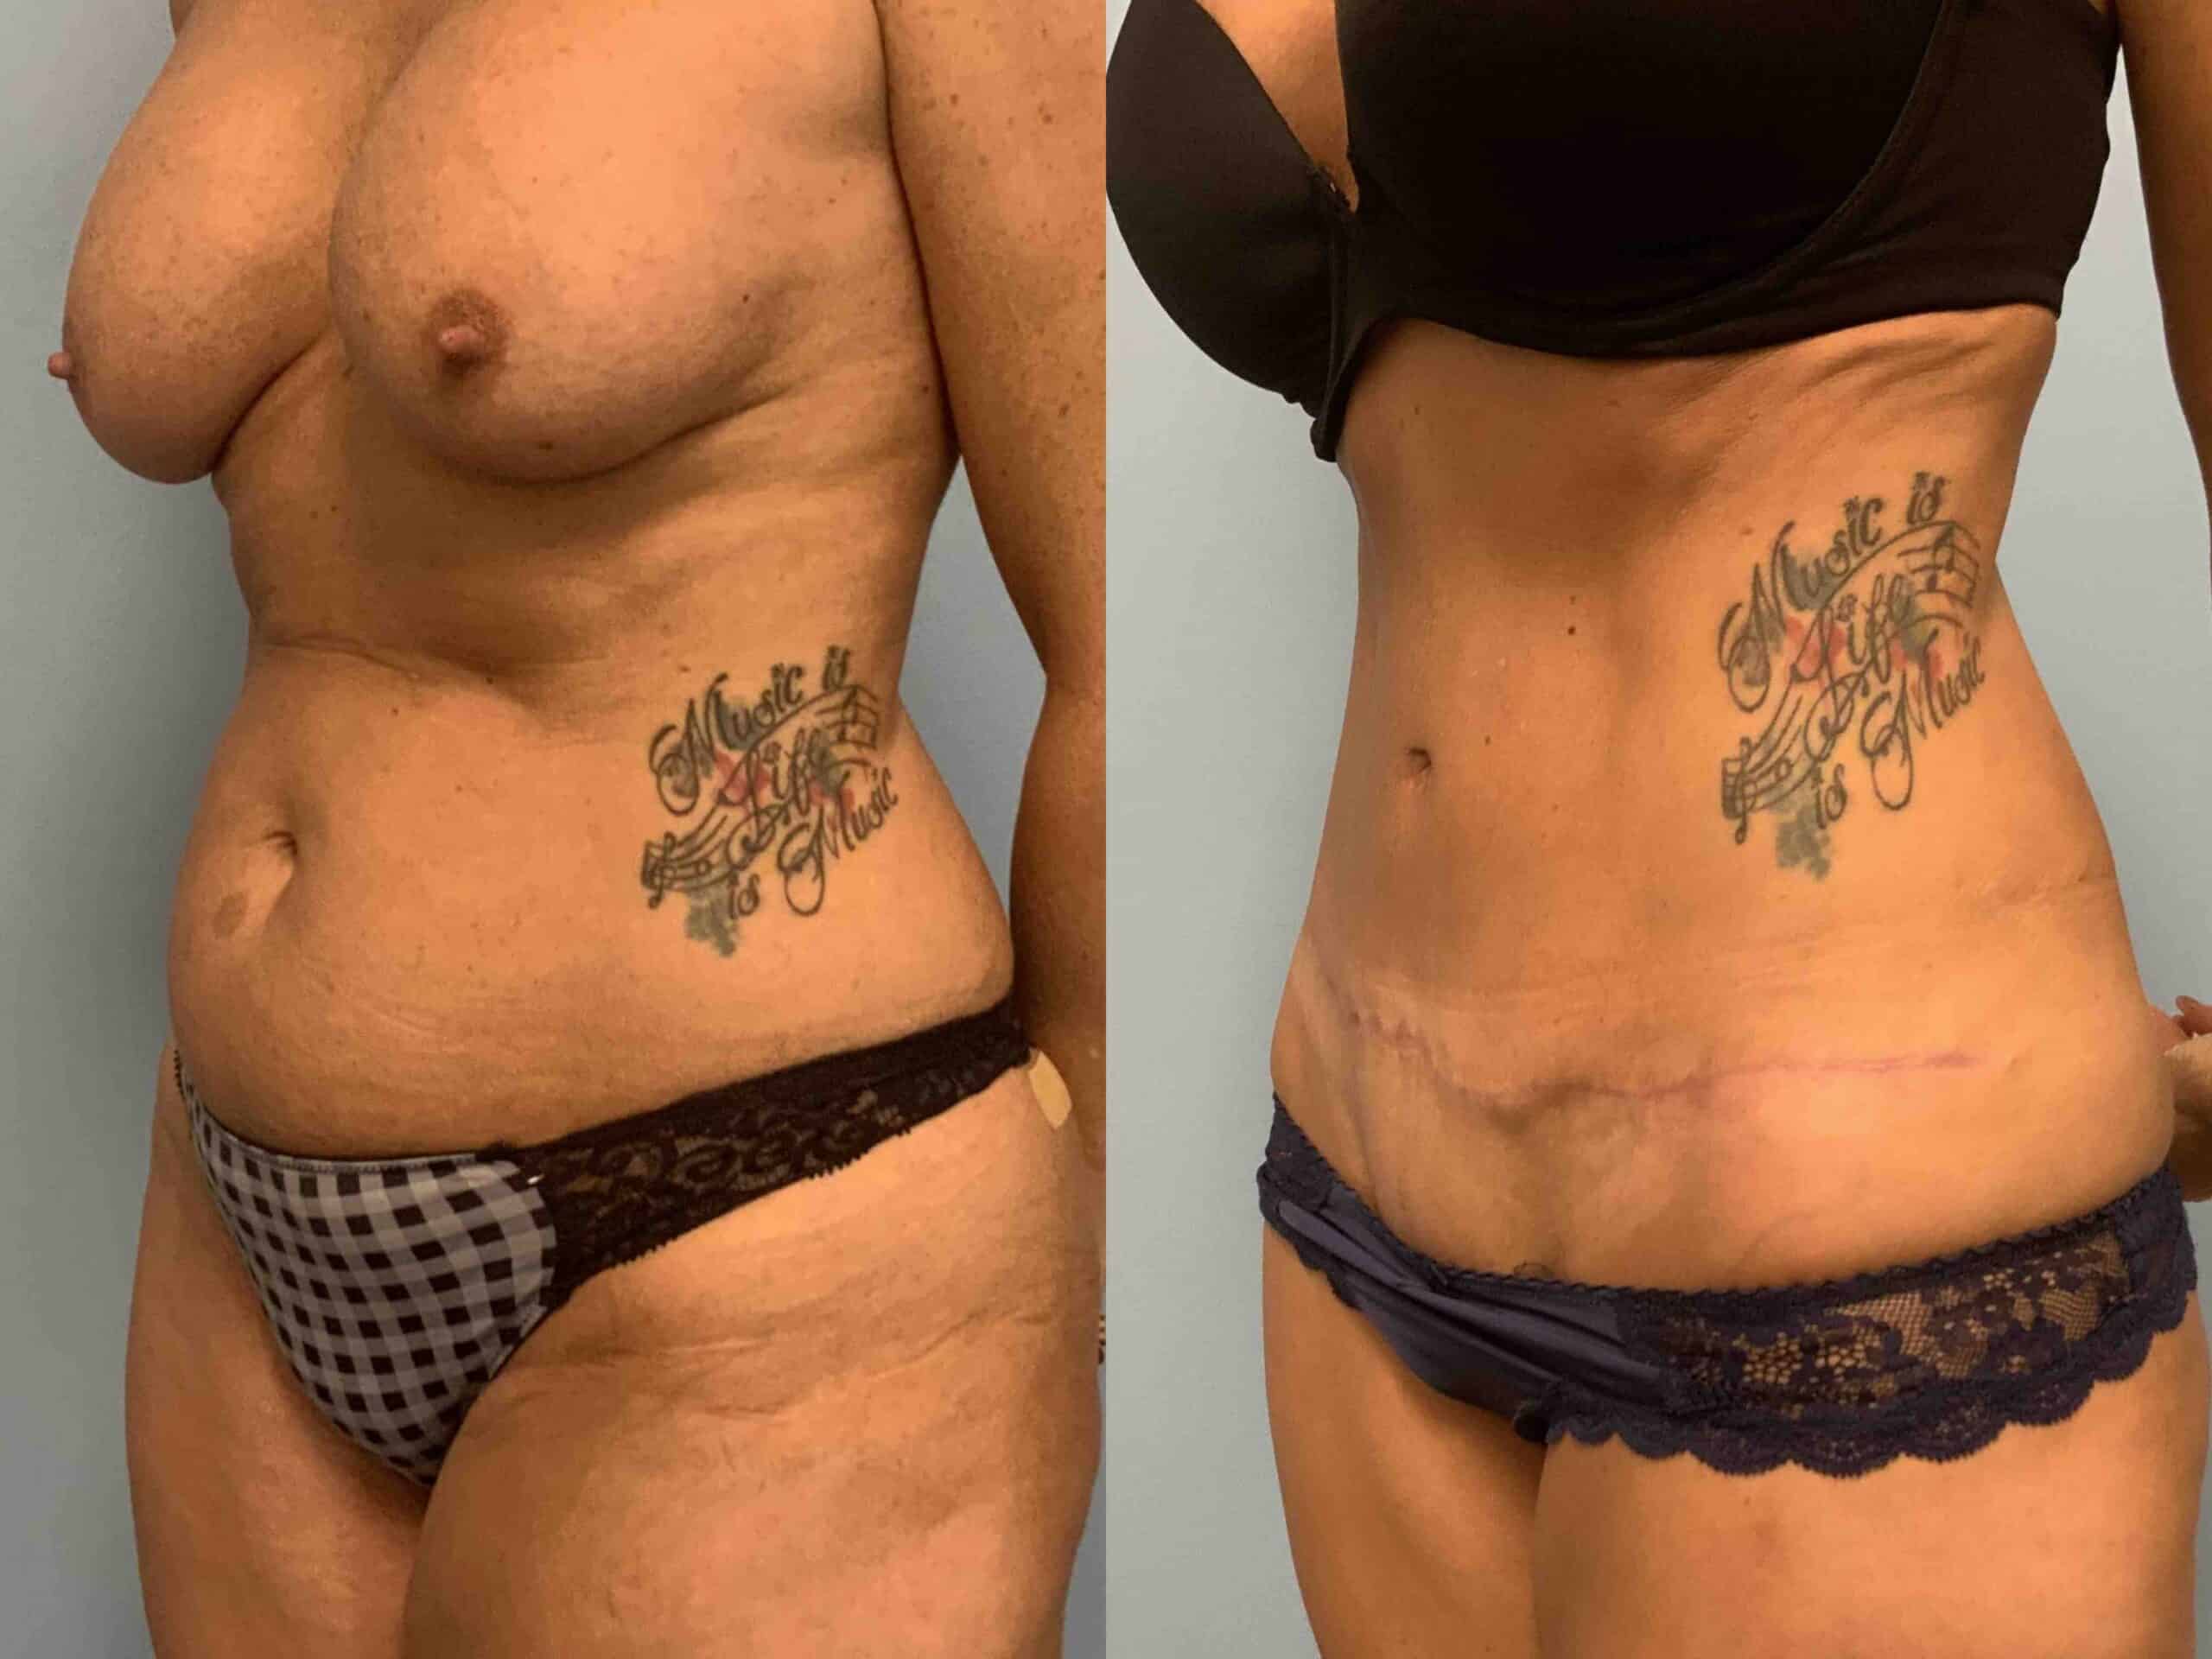 Before and after, patient 3 mo post op from Renuvion Abdomen, Tummy Tuck VASER procedures performed by Dr. Paul Vanek